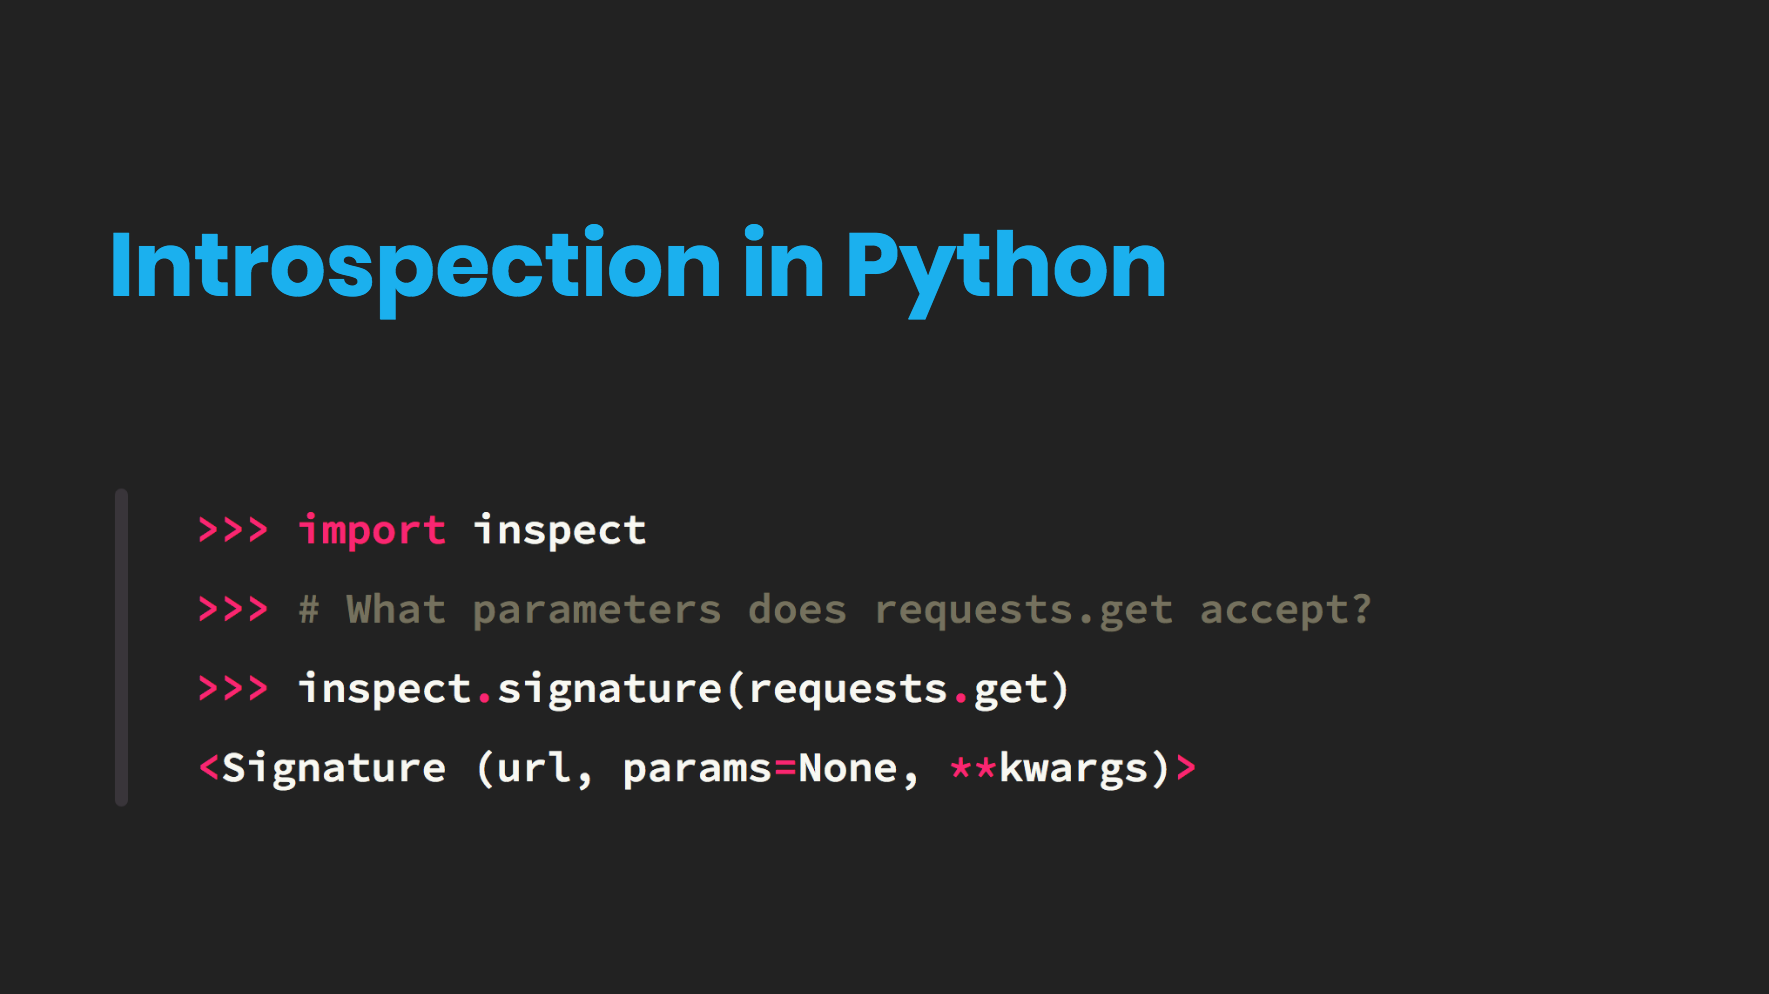 Python objects speak for themselves